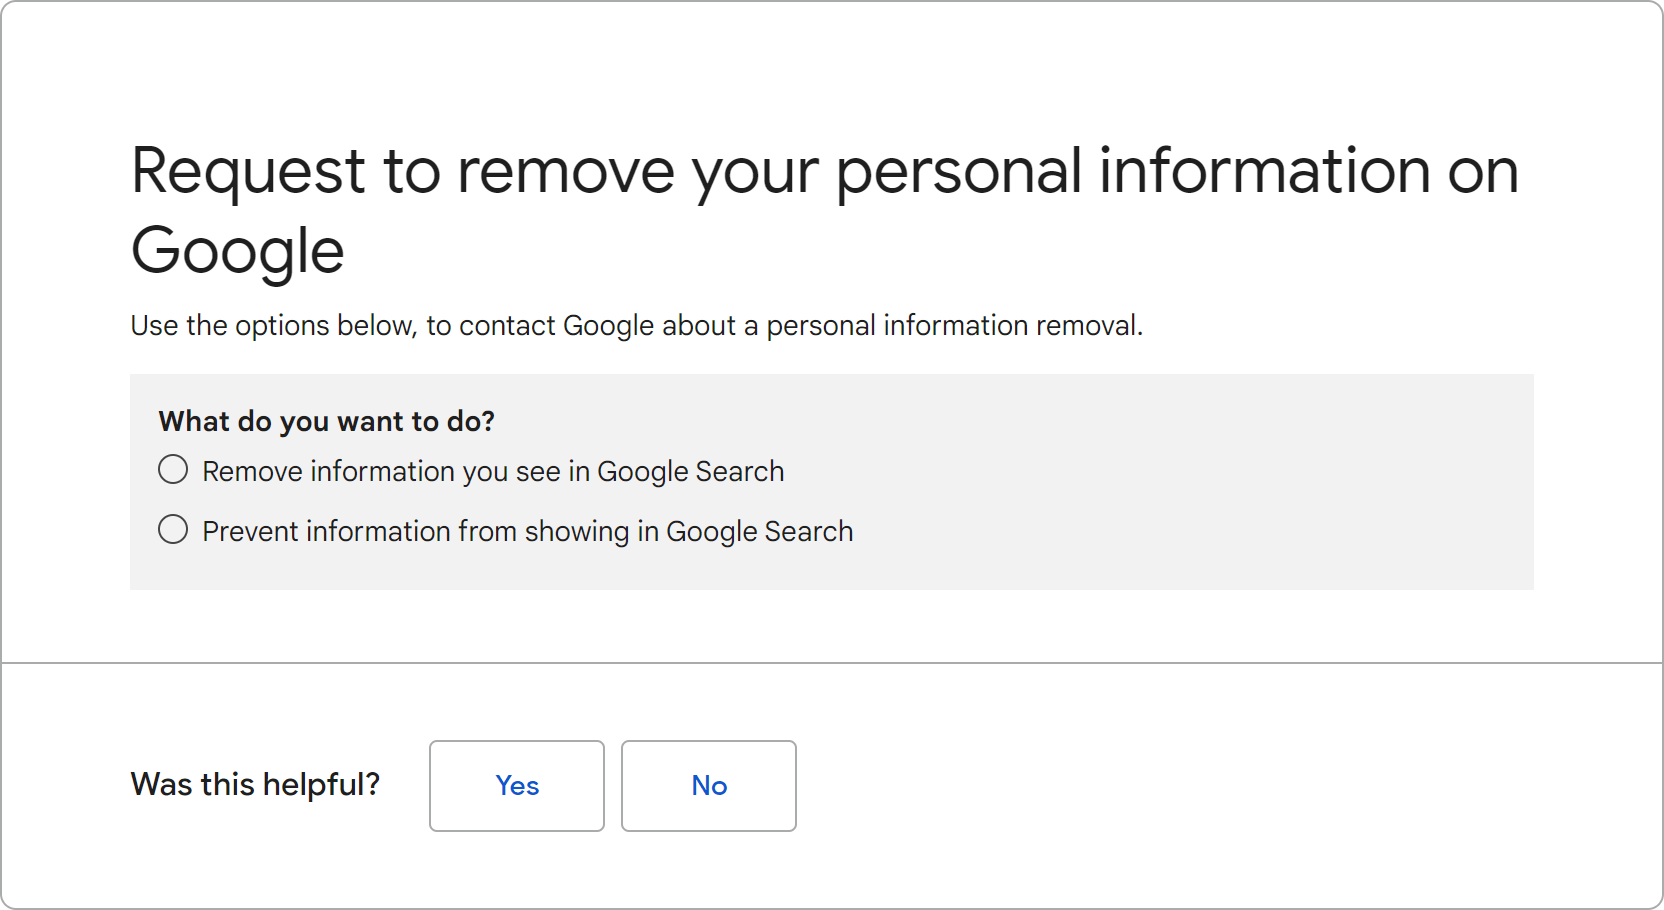 Request to remove your personal information on Google